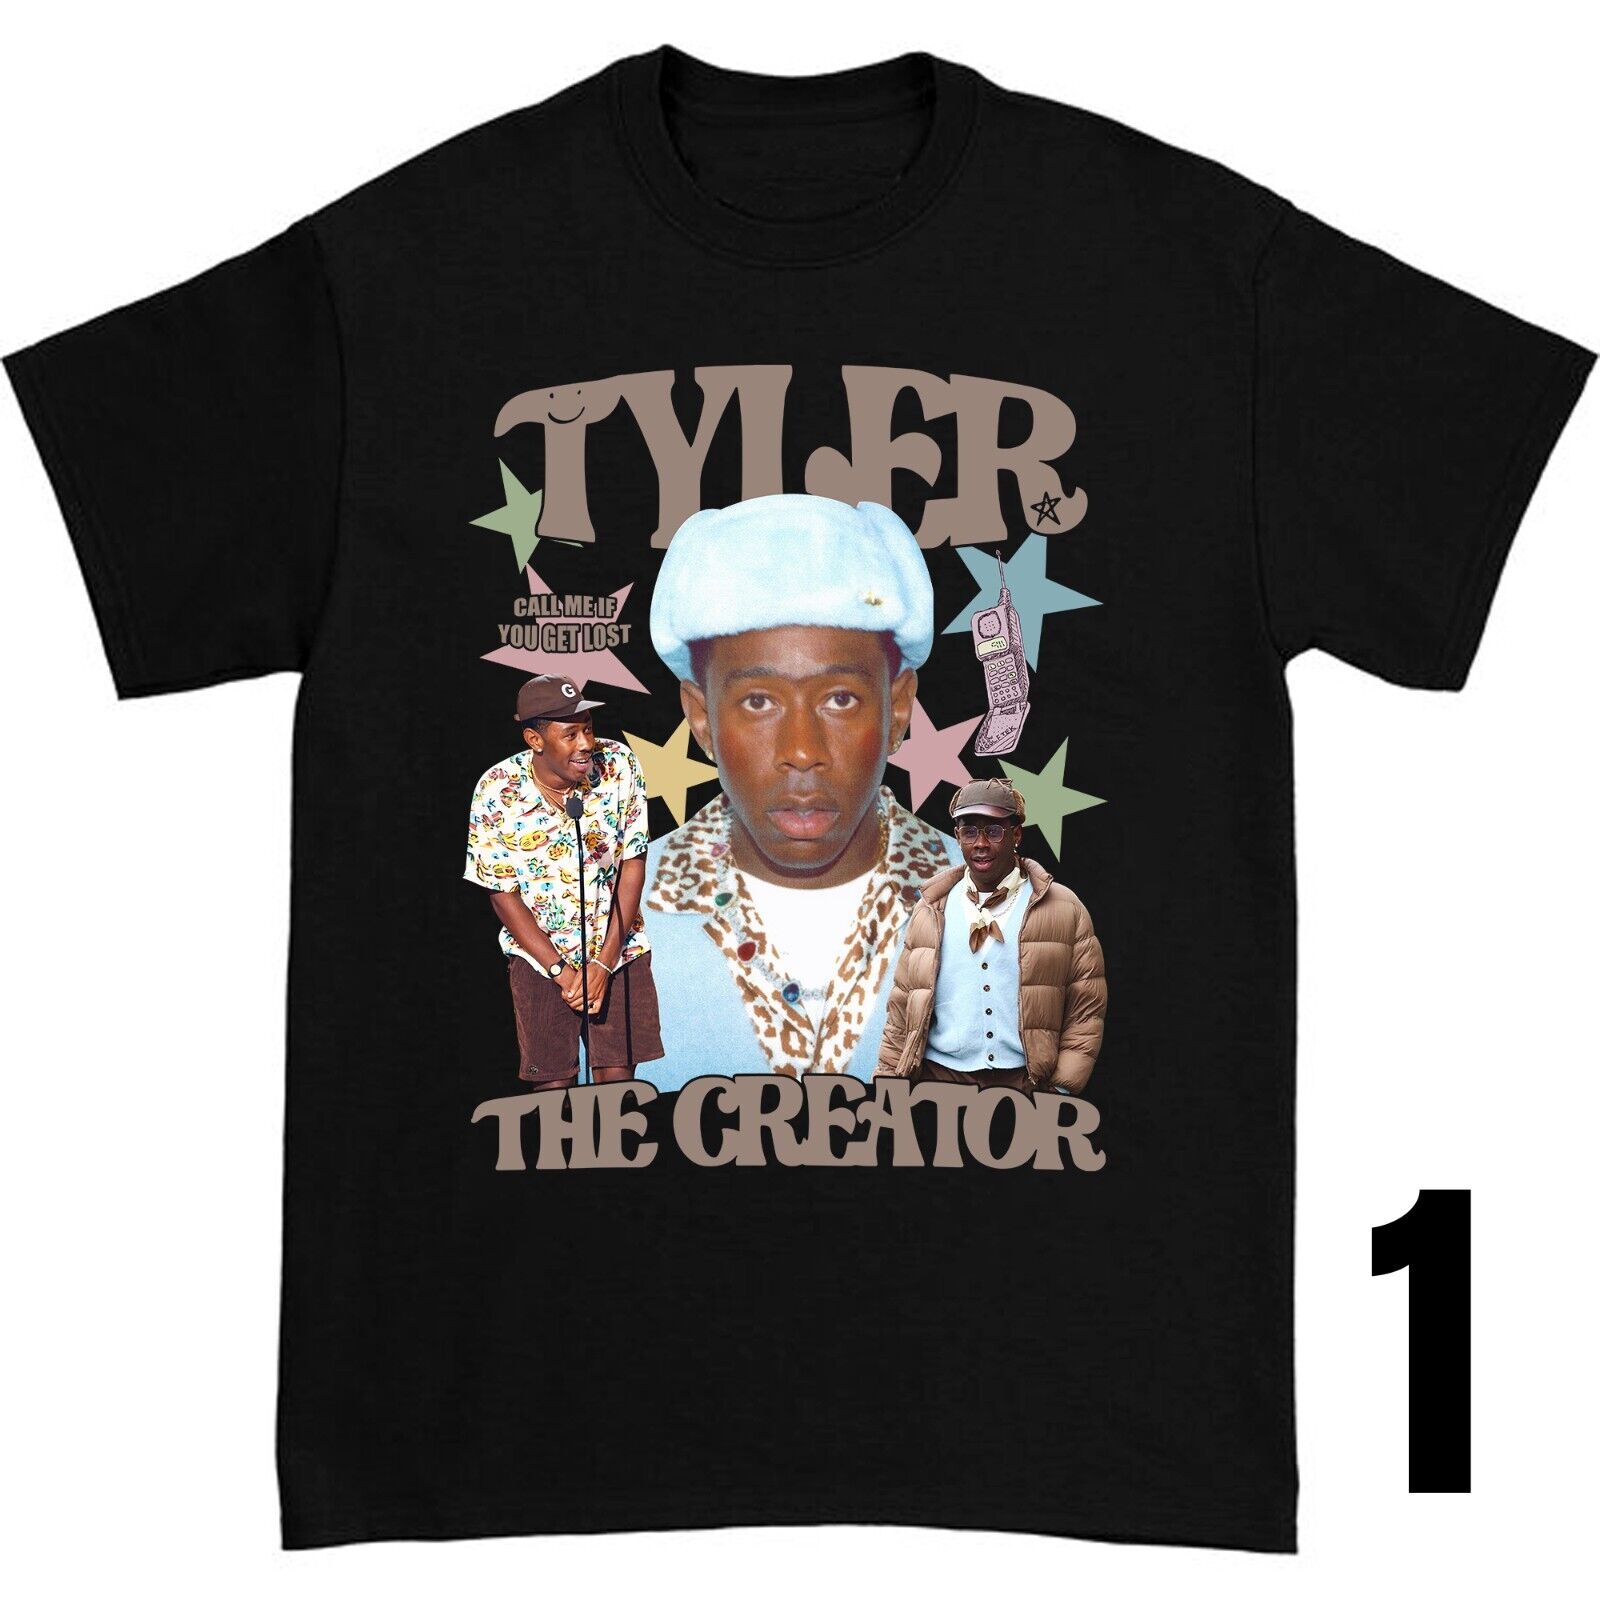 New Rare Tyler The Creator Gift For Fans Unisex All-Size Shirt GET IT NOW